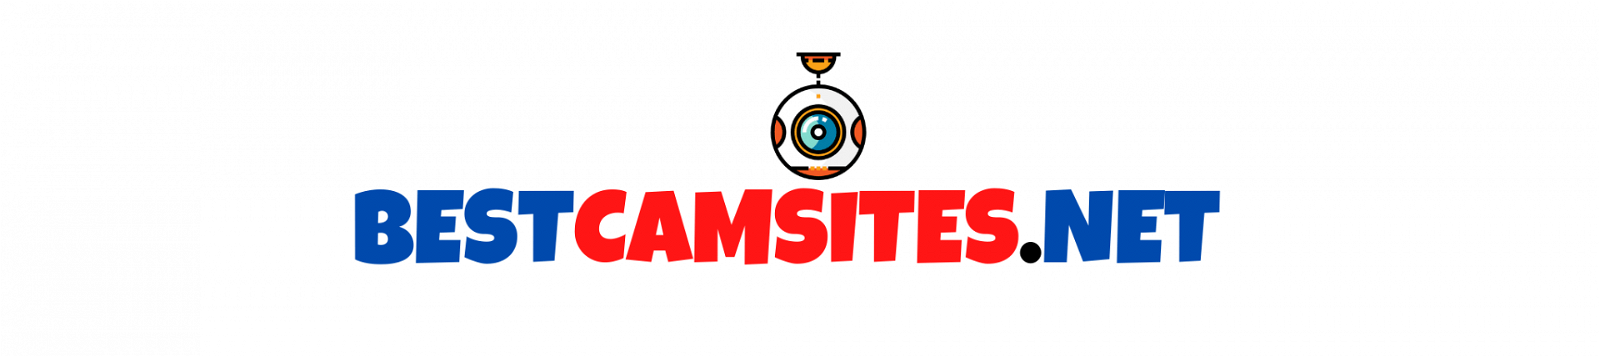 Cover photo of bestcamsites